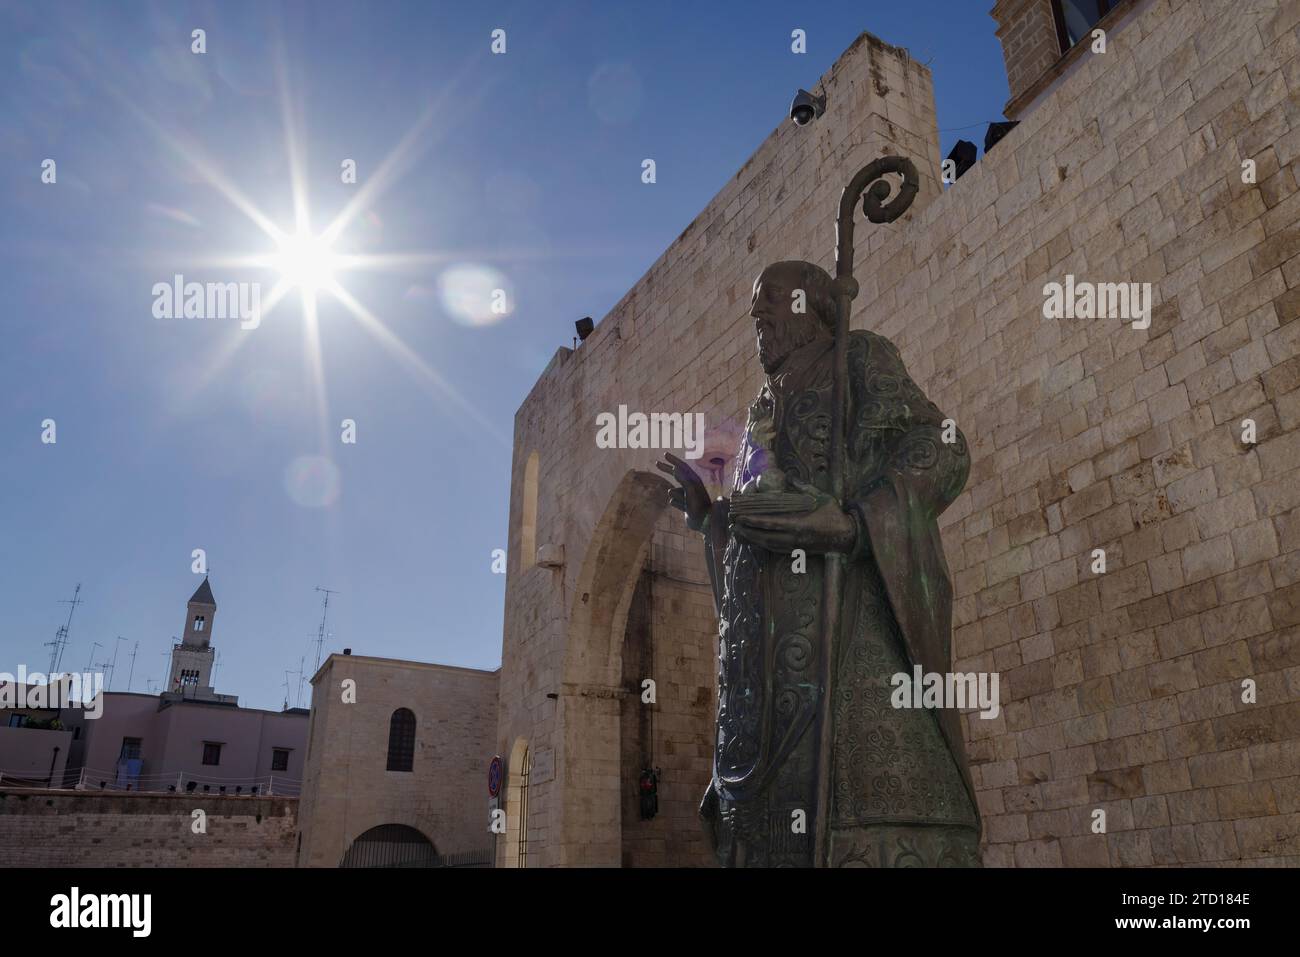 Statue of Saint Nicholas at the church and pilgrimage site Basilica San Nicola in the old town Bari Vecchia, Italy Stock Photo